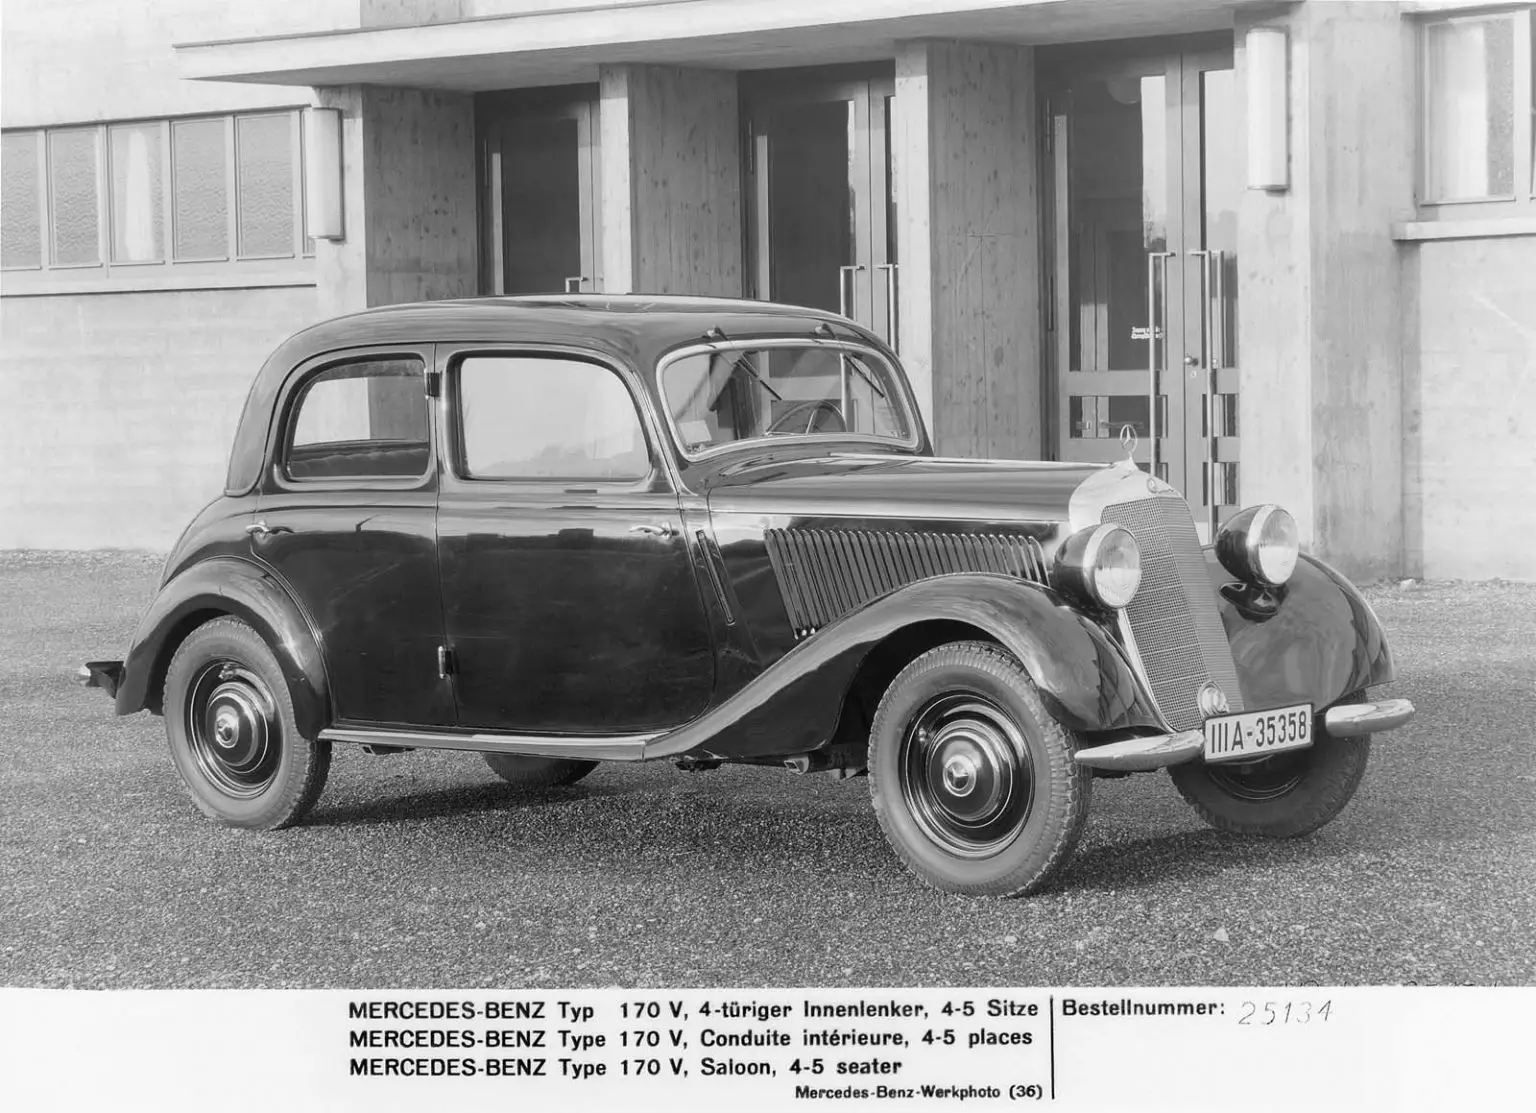 Mercedes-Benz 170 V (W 136), unveiled in February 1936 at the IAMA in Berlin